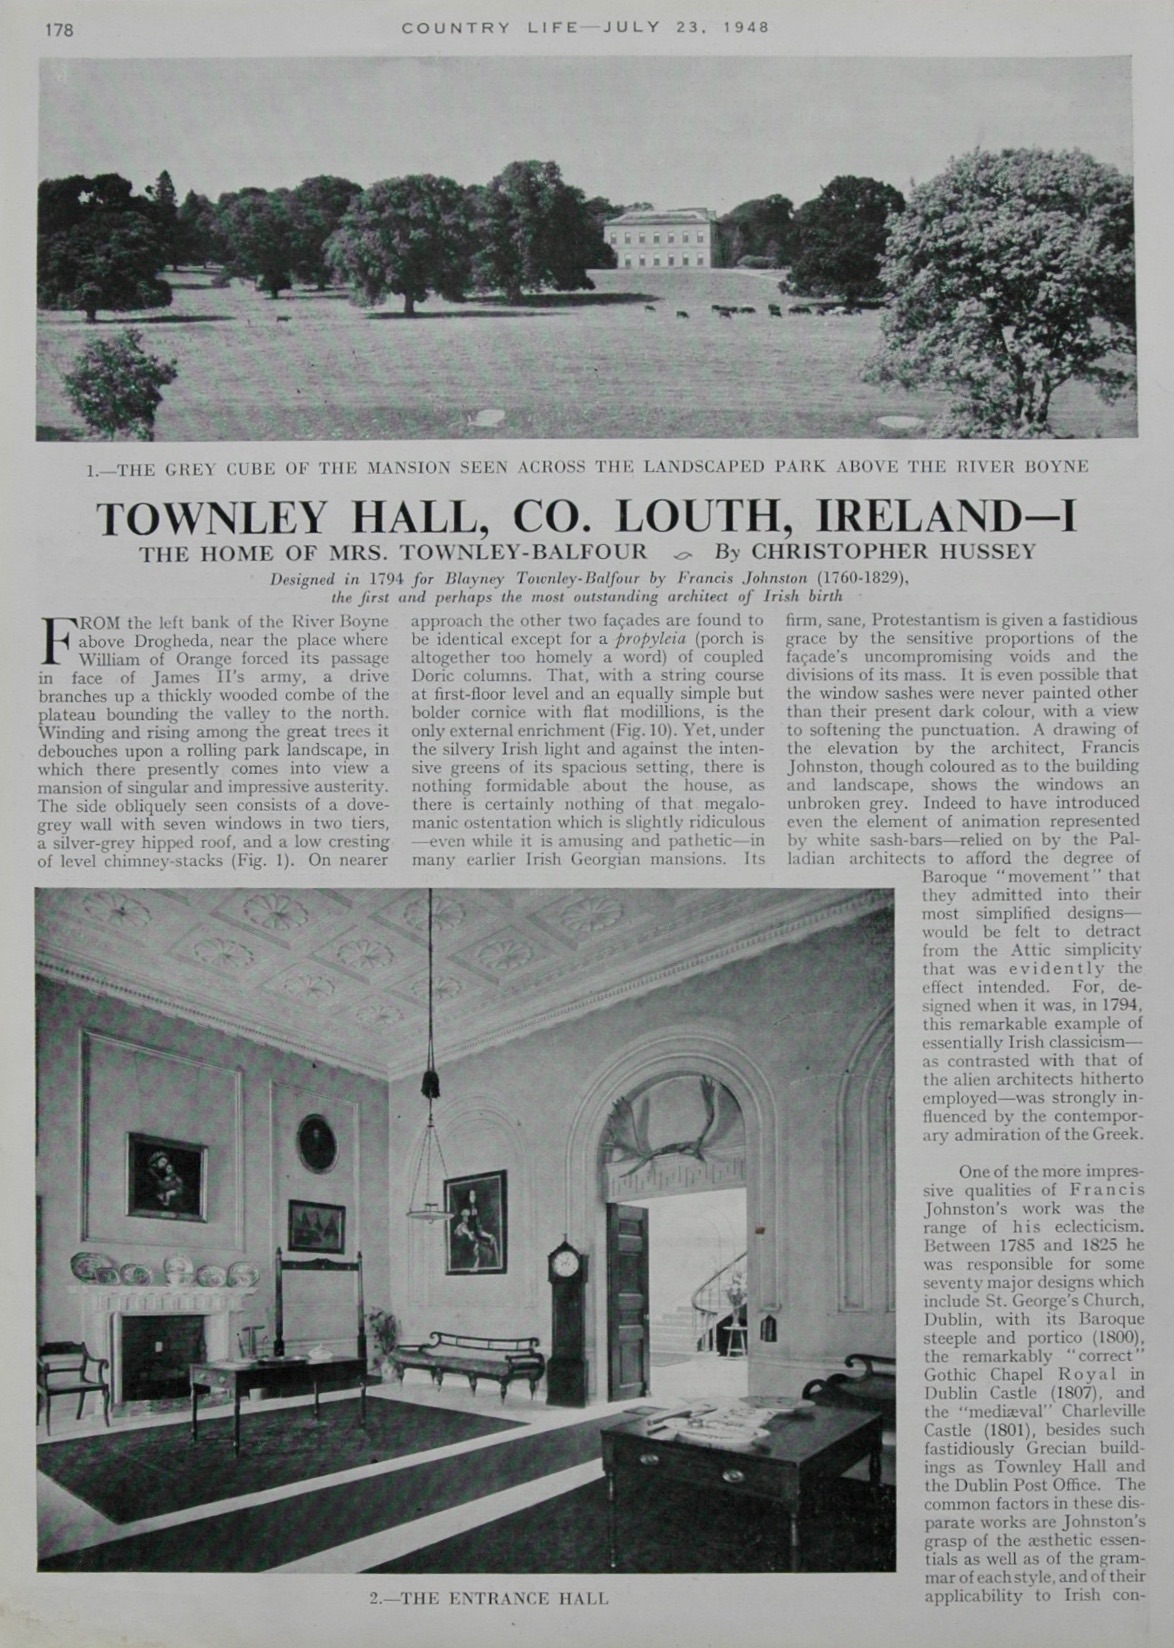 Townley Hall, Co. Louth